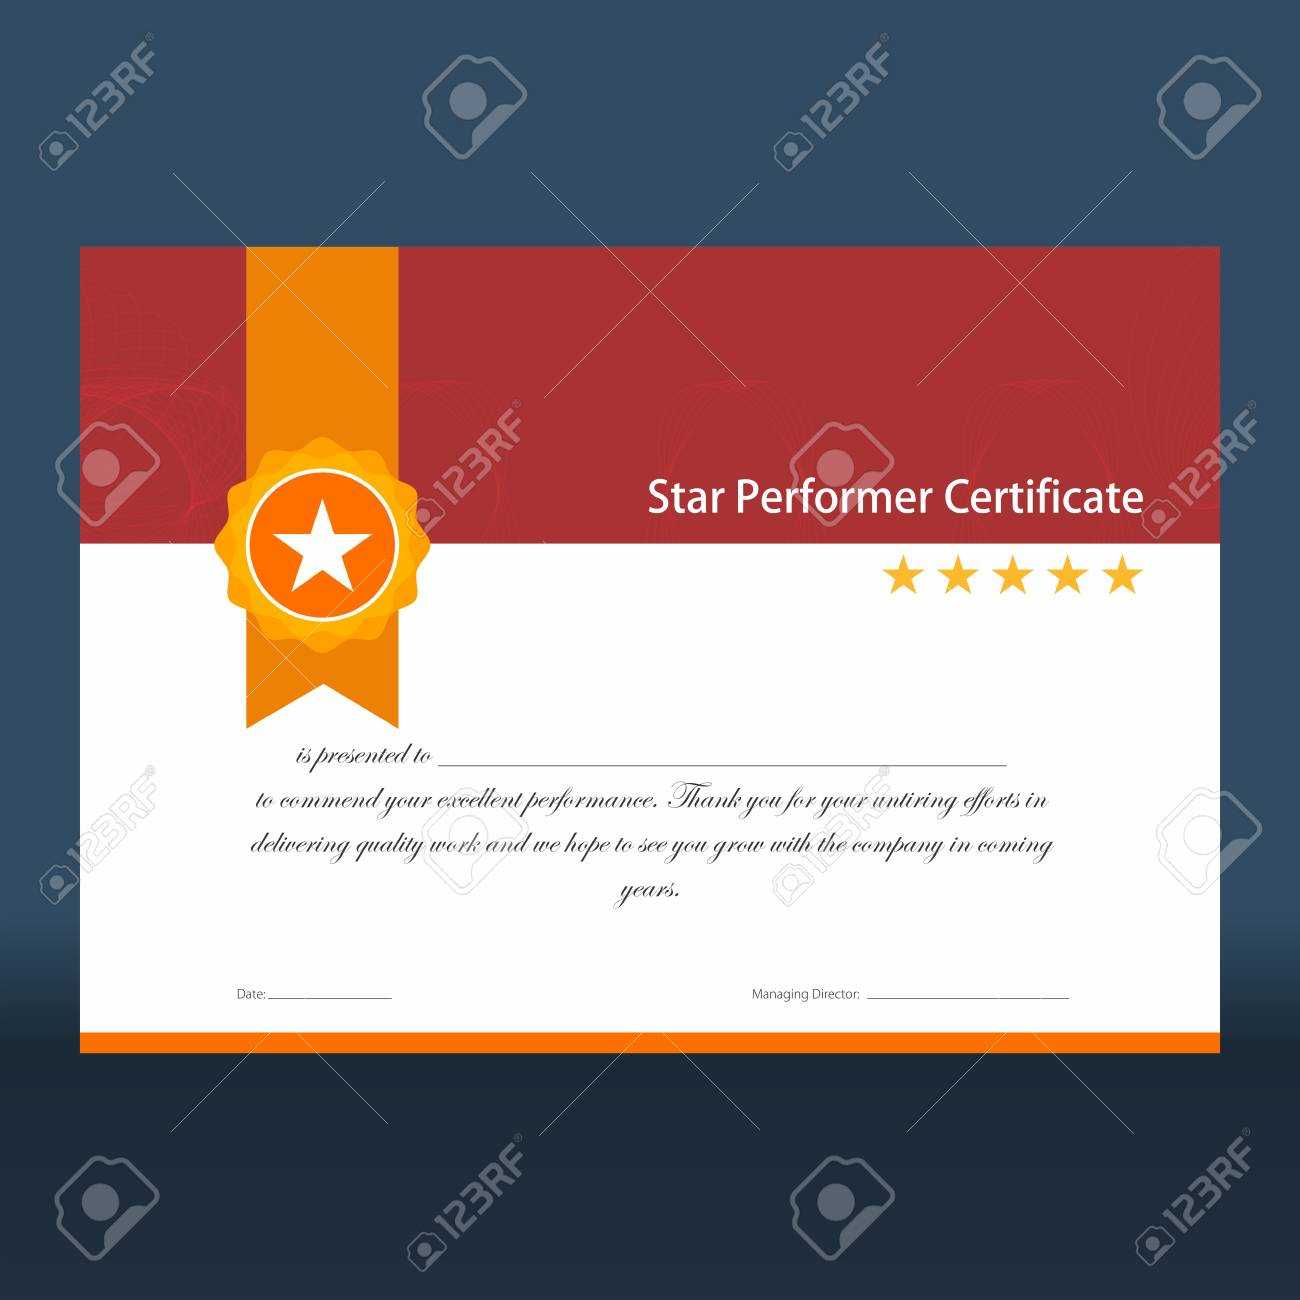 Star Performer Certificate With Red Top Half And Golden Ribbon.. Regarding Star Performer Certificate Templates